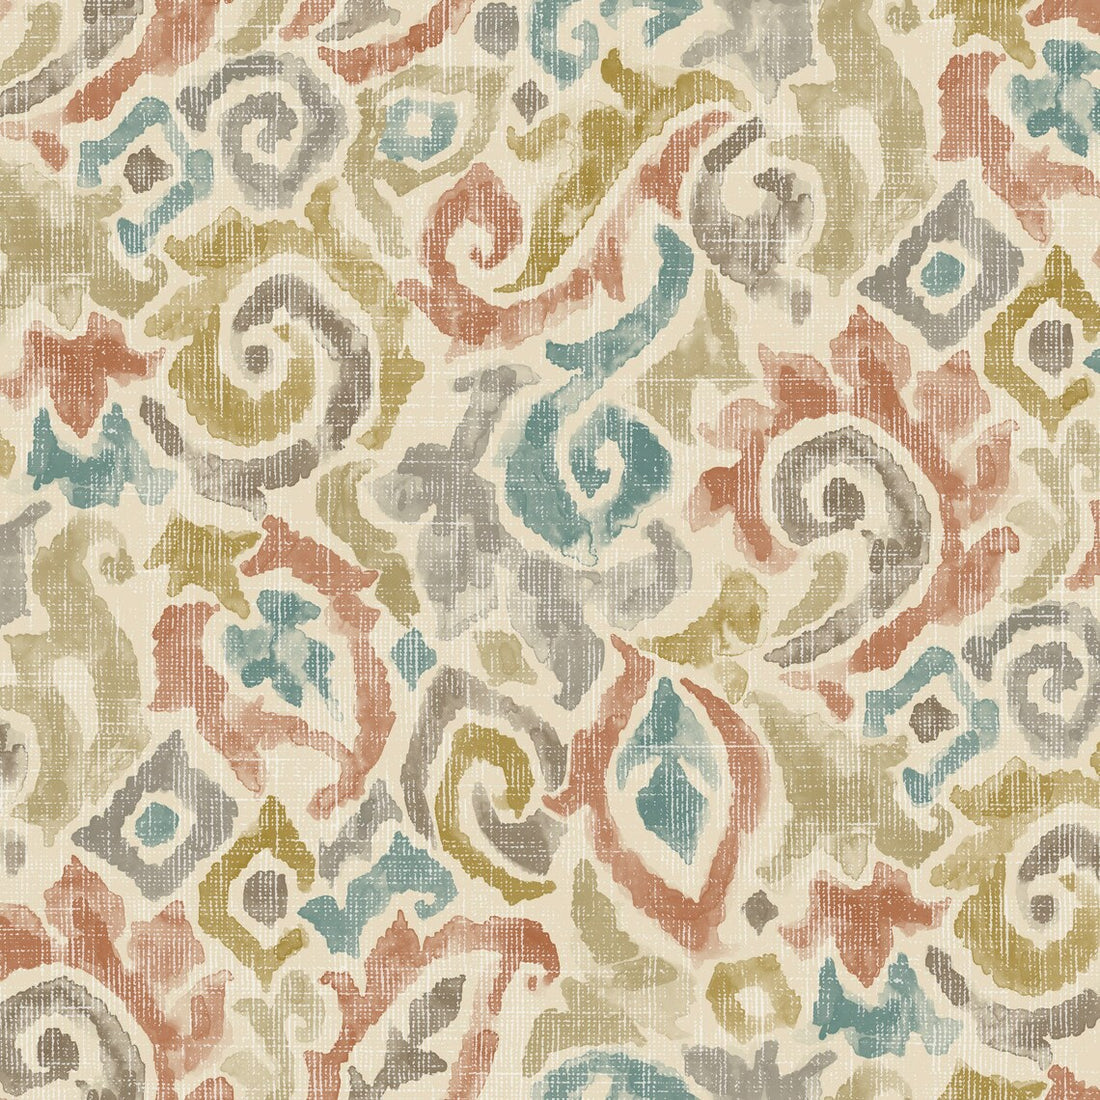 rod pocket curtain panels pair in Jester Tuscan Paisley Watercolor- Blue, Terracotta, Gray, Tan